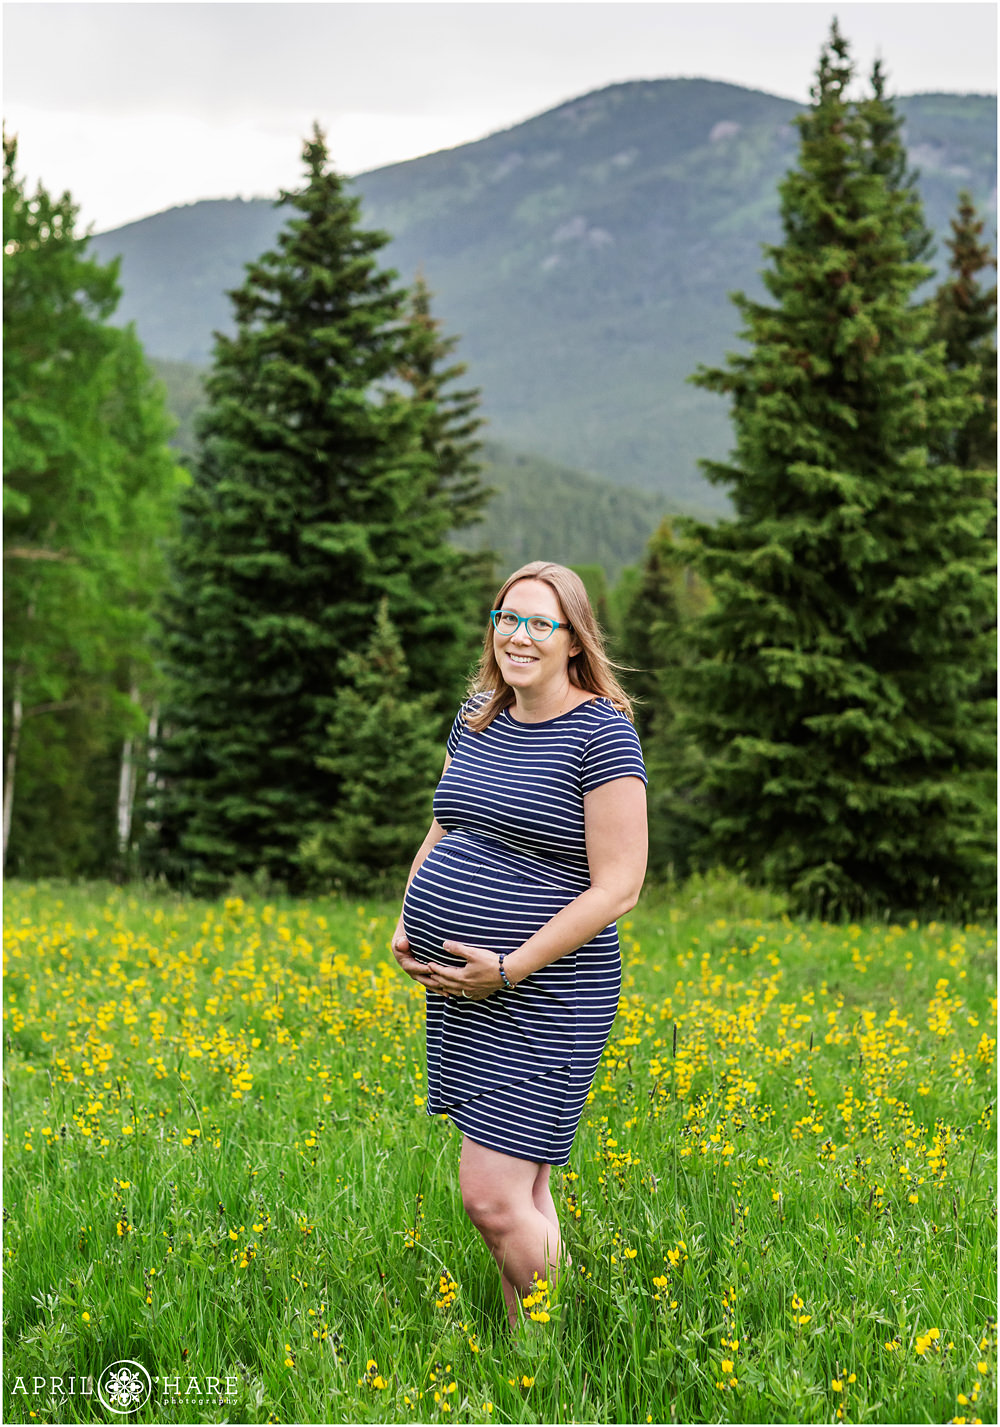 Unique Mountain Maternity Portraits in a field of yellow wildflowers